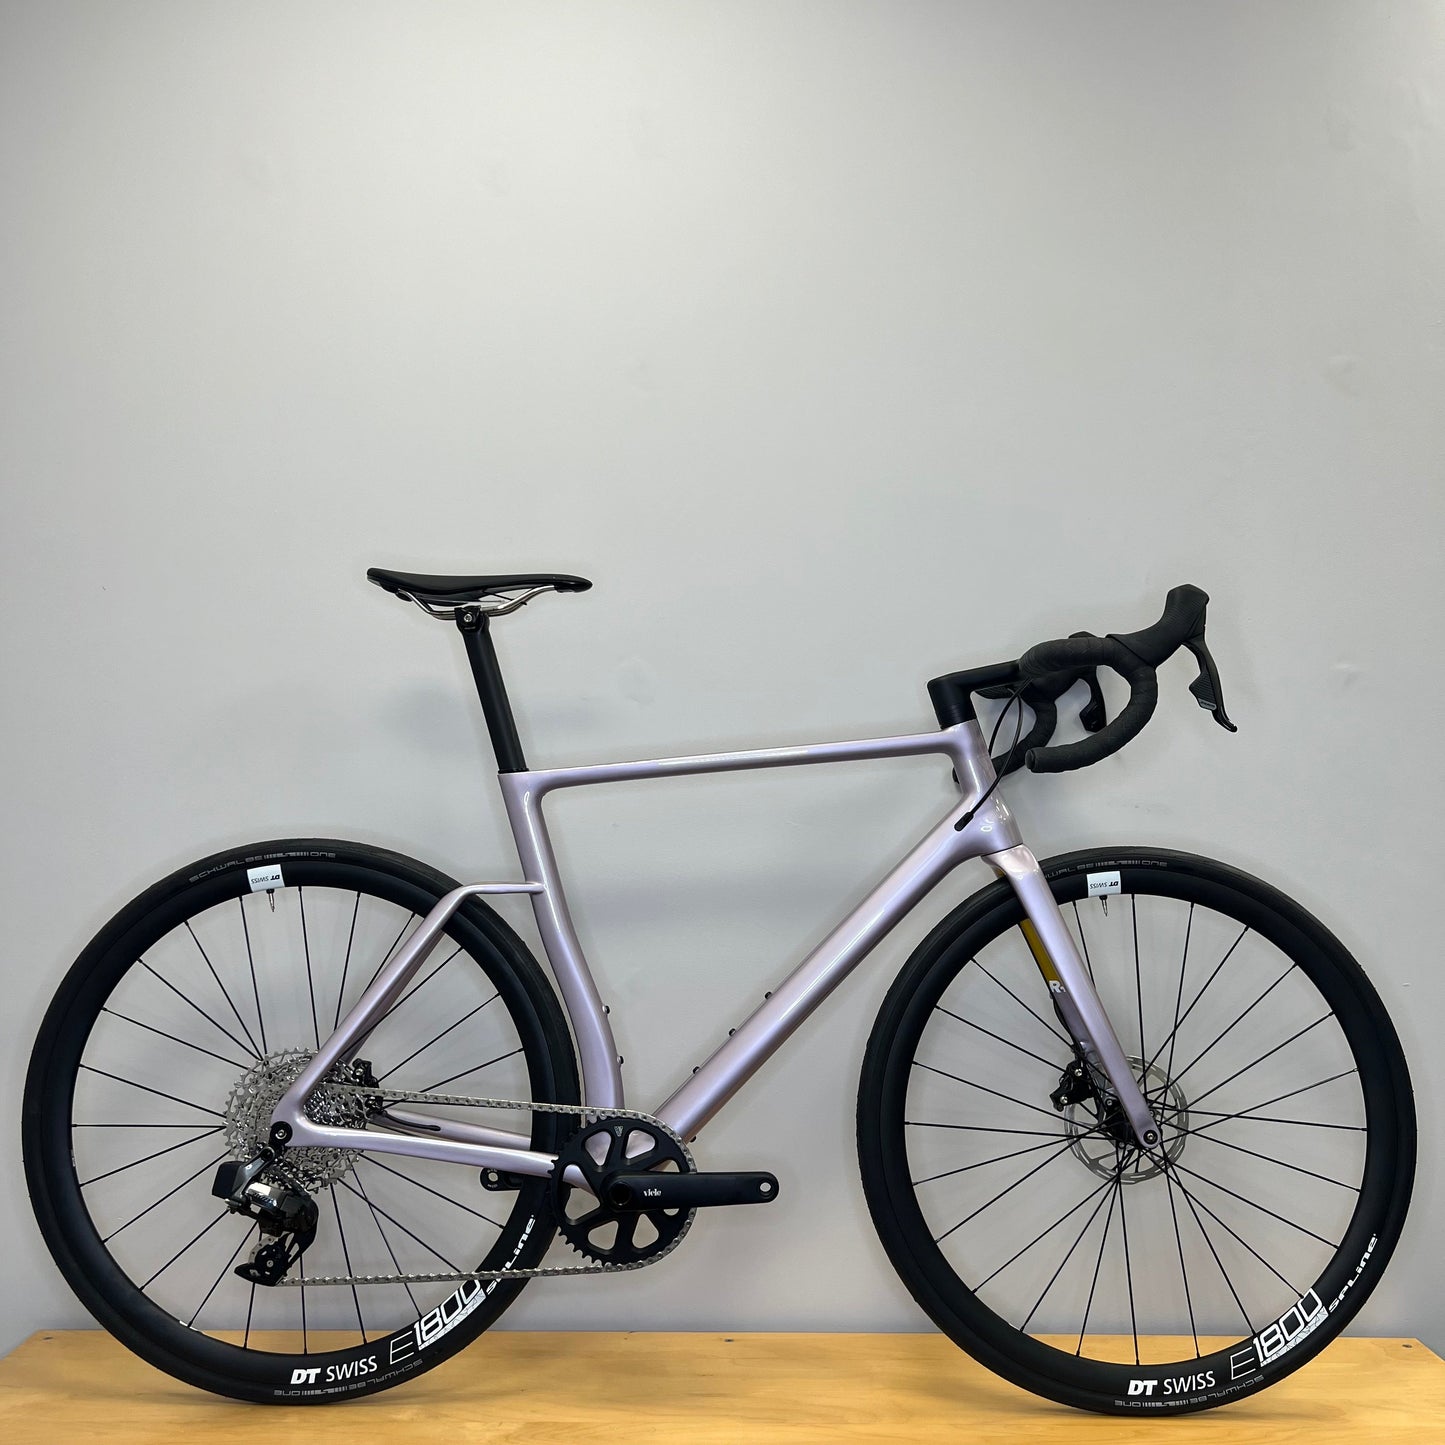 Vielo R+1 Large Lilac Strato Sram Rival with DT Swiss E1800